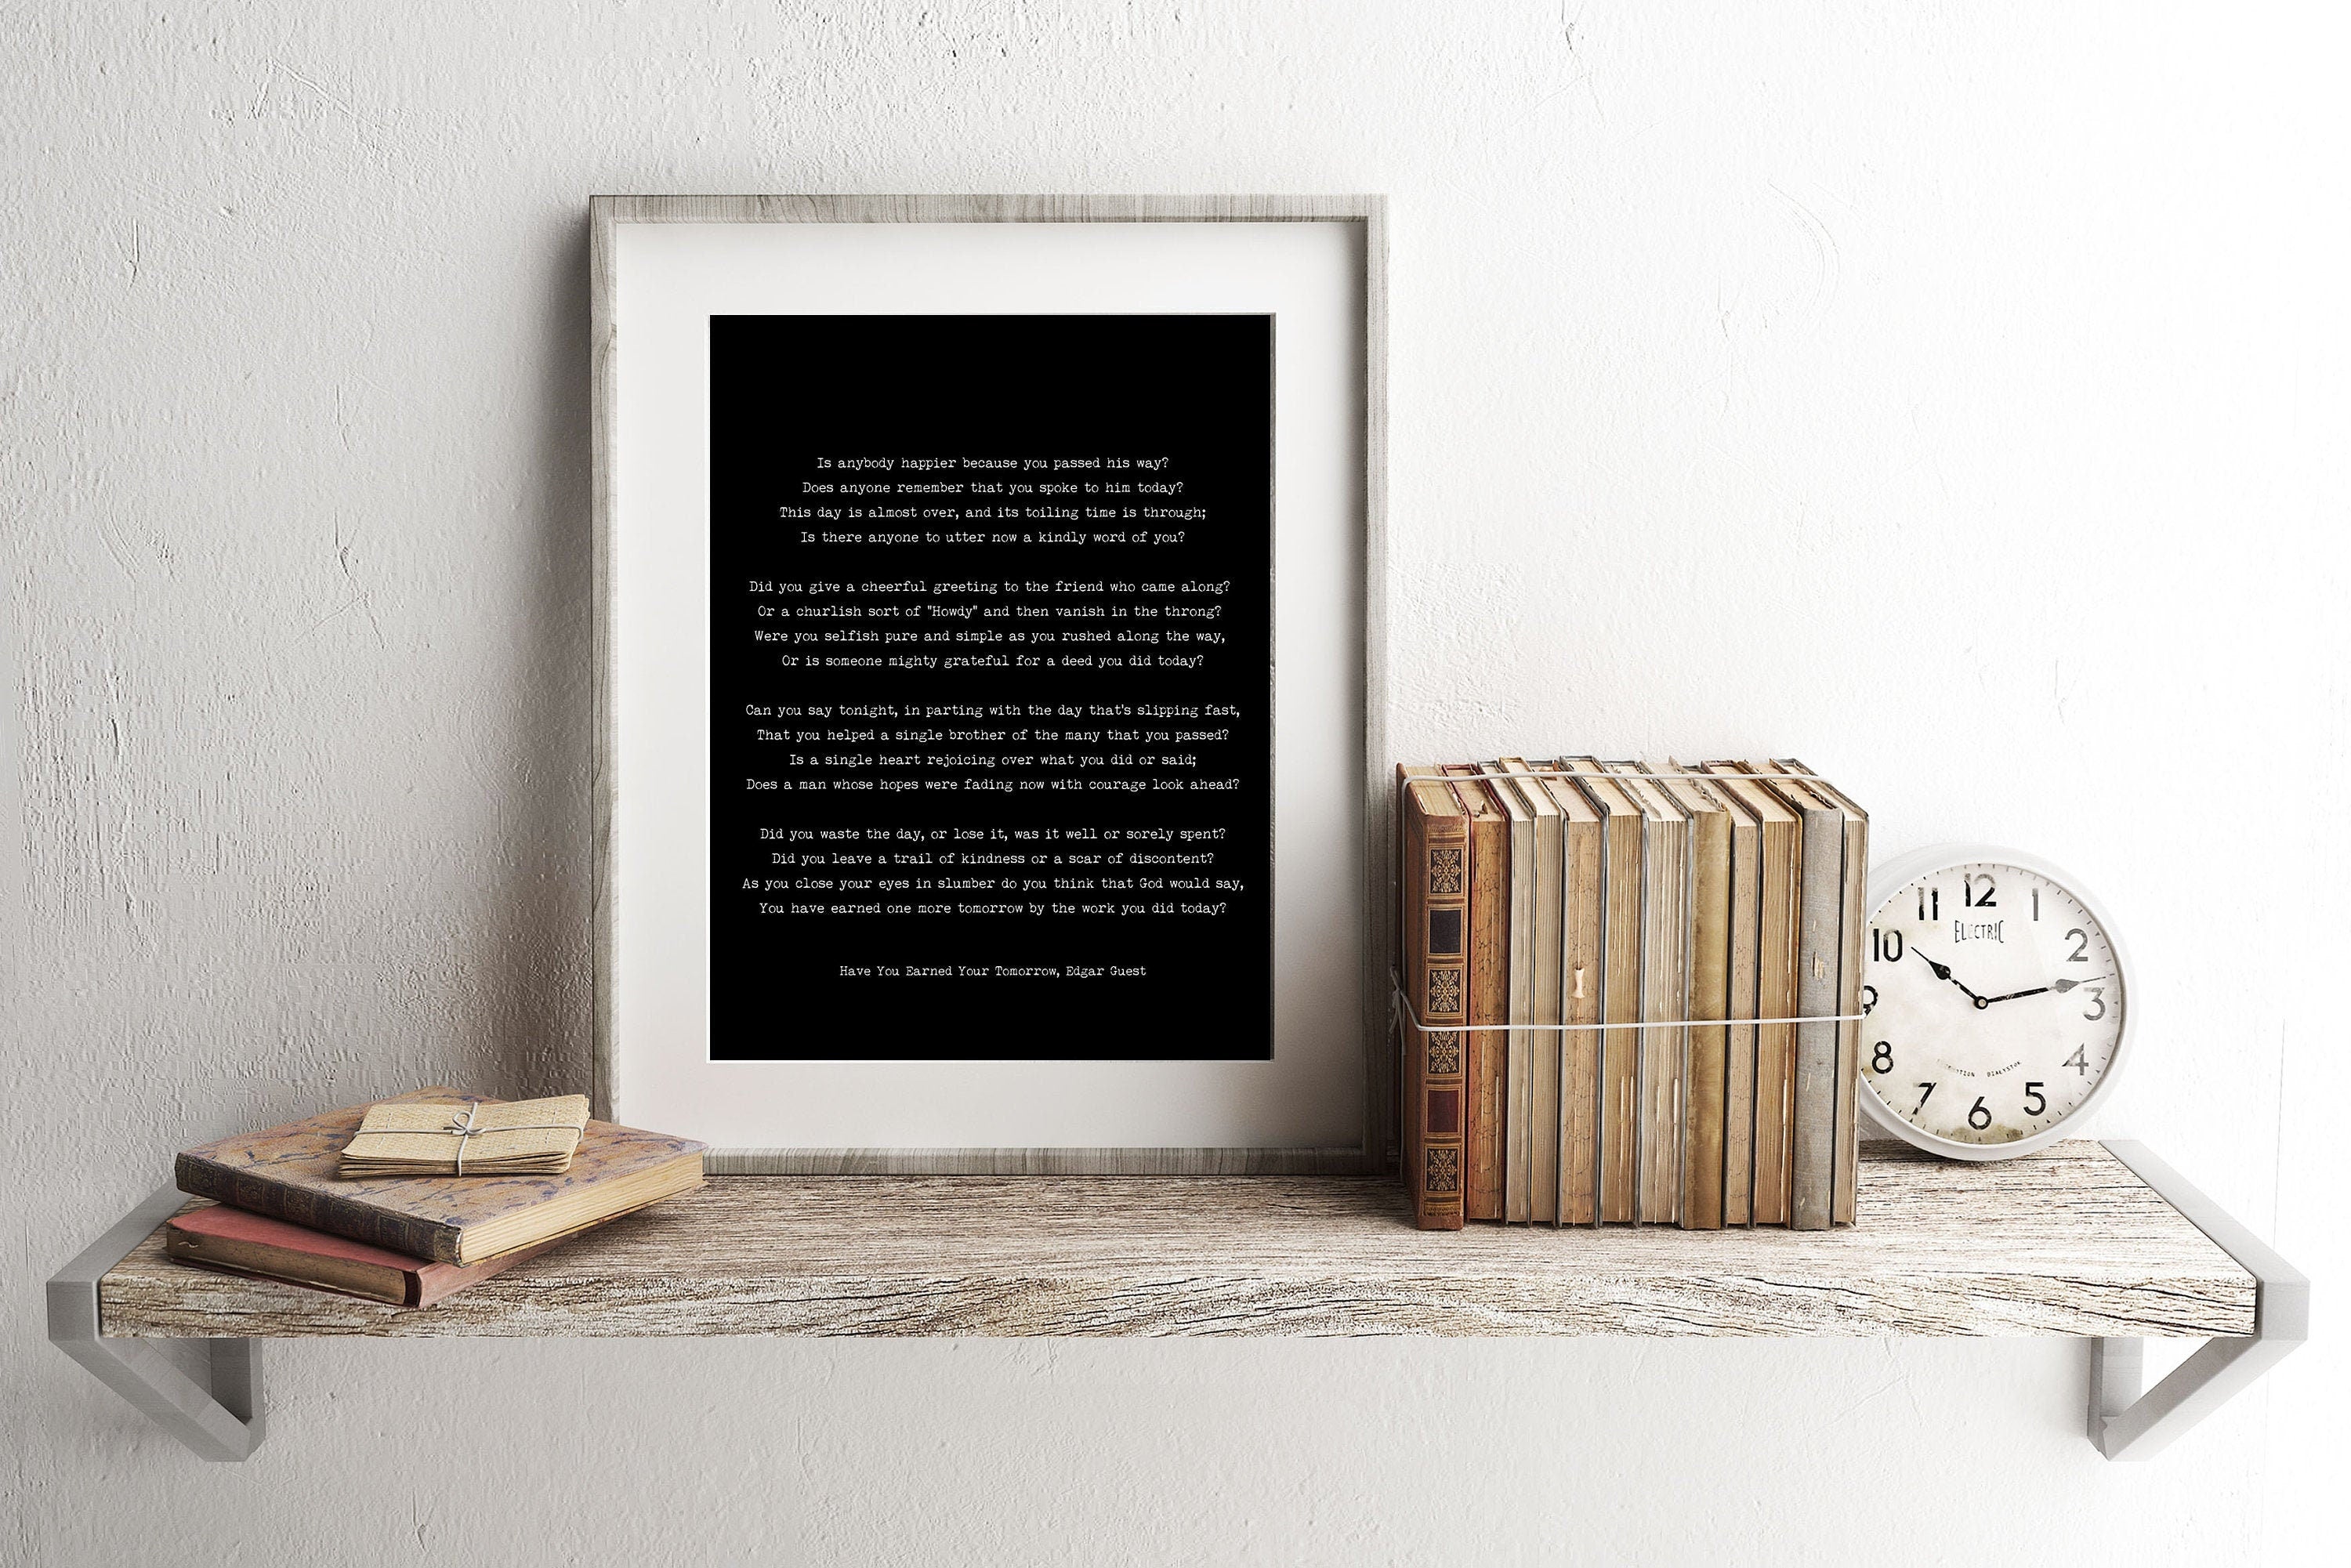 Edgar Guest Poem, Have you earned your tomorrow - poetry wall art prints unframed